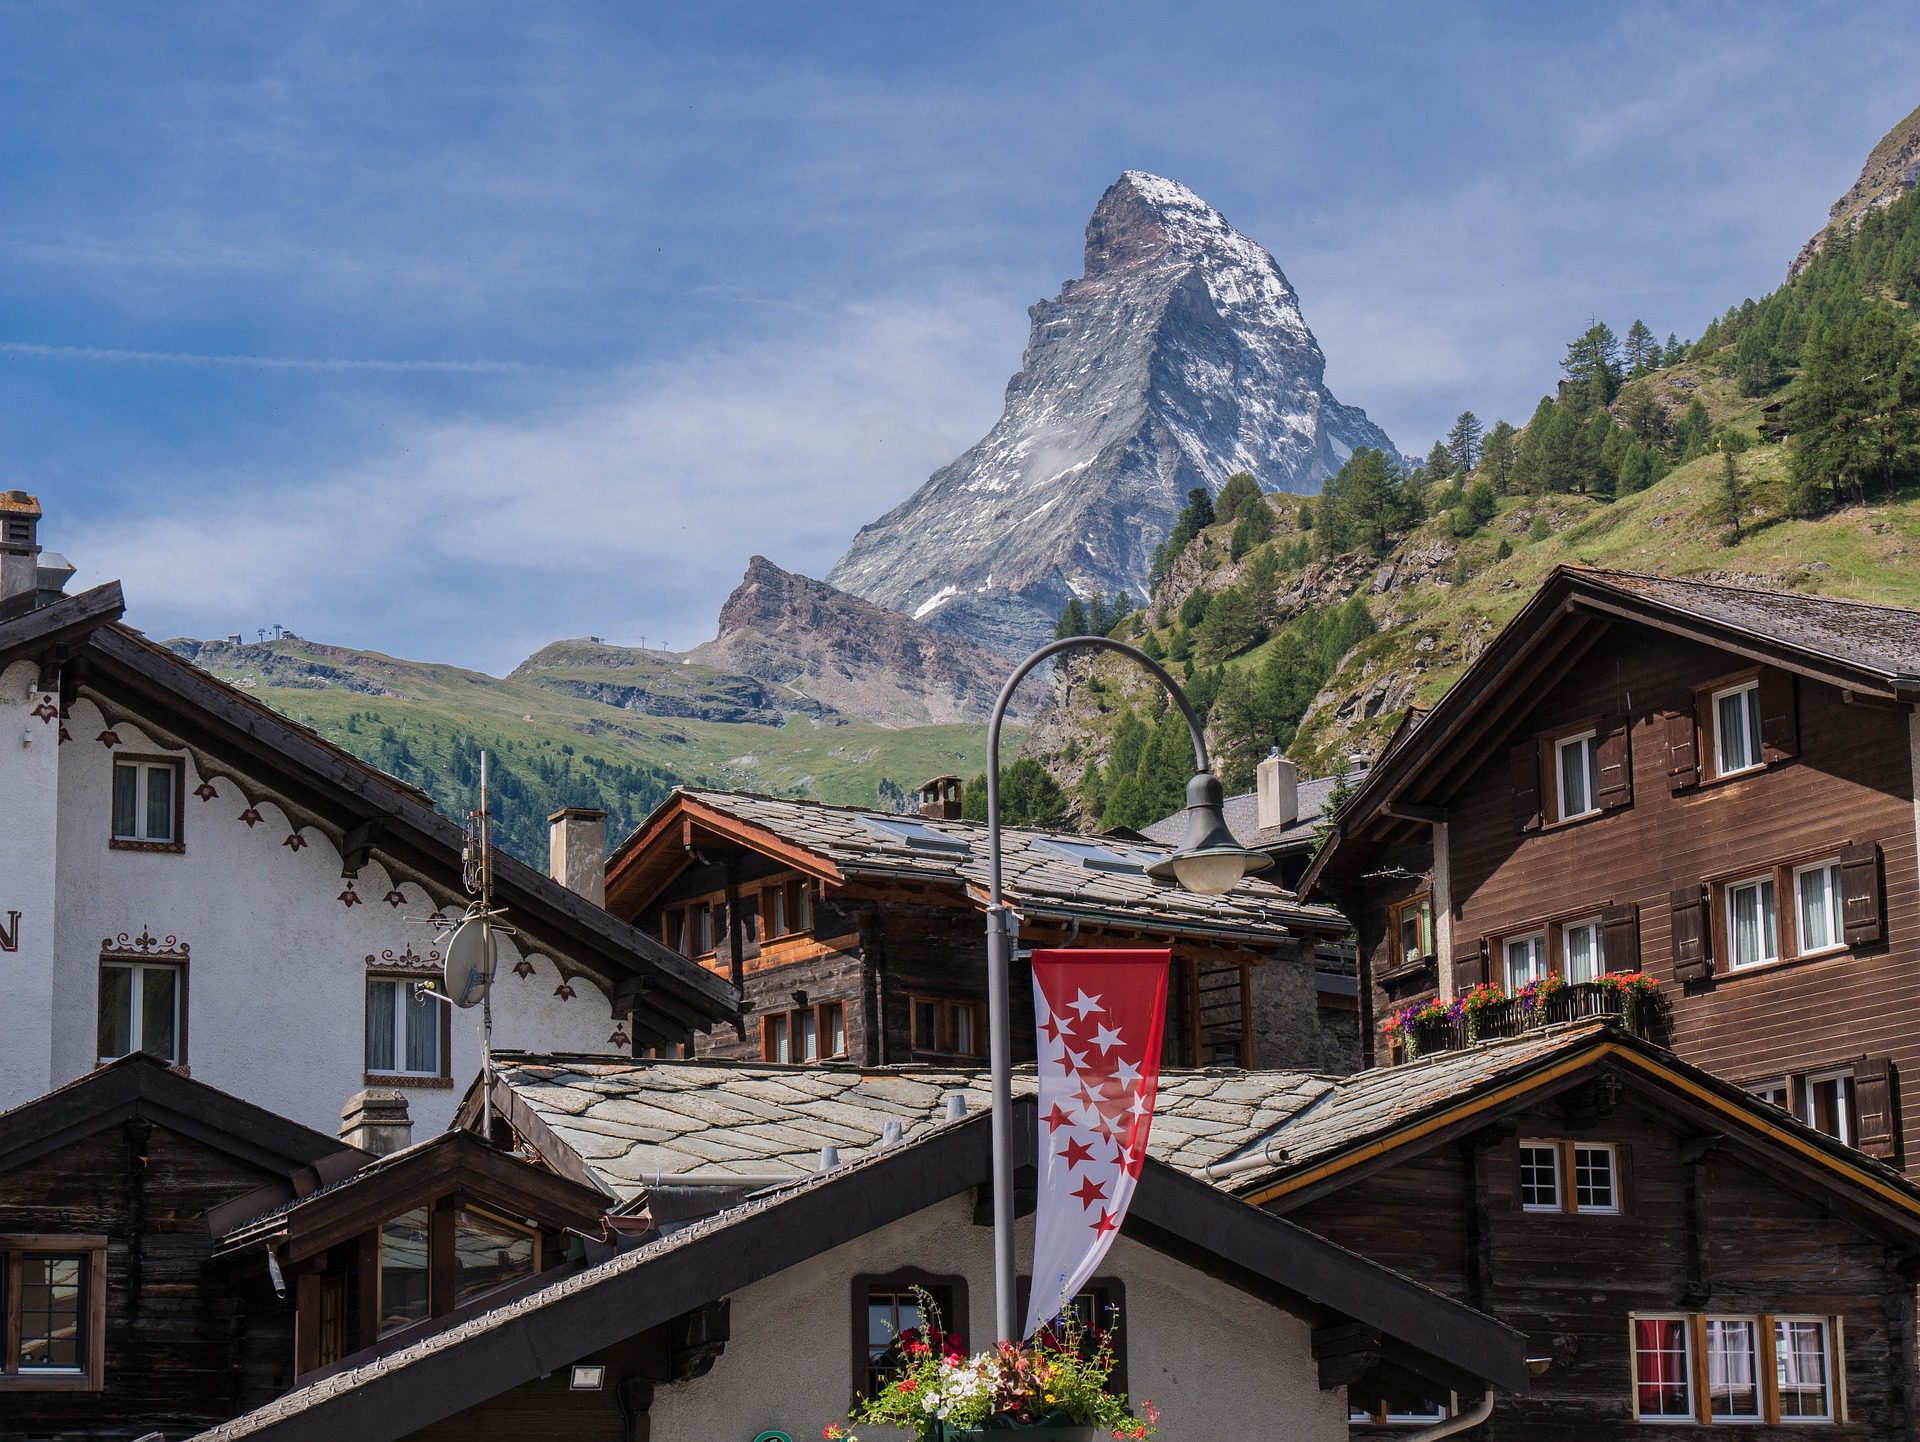 The Ultimate Guide to Christmas in Zermatt